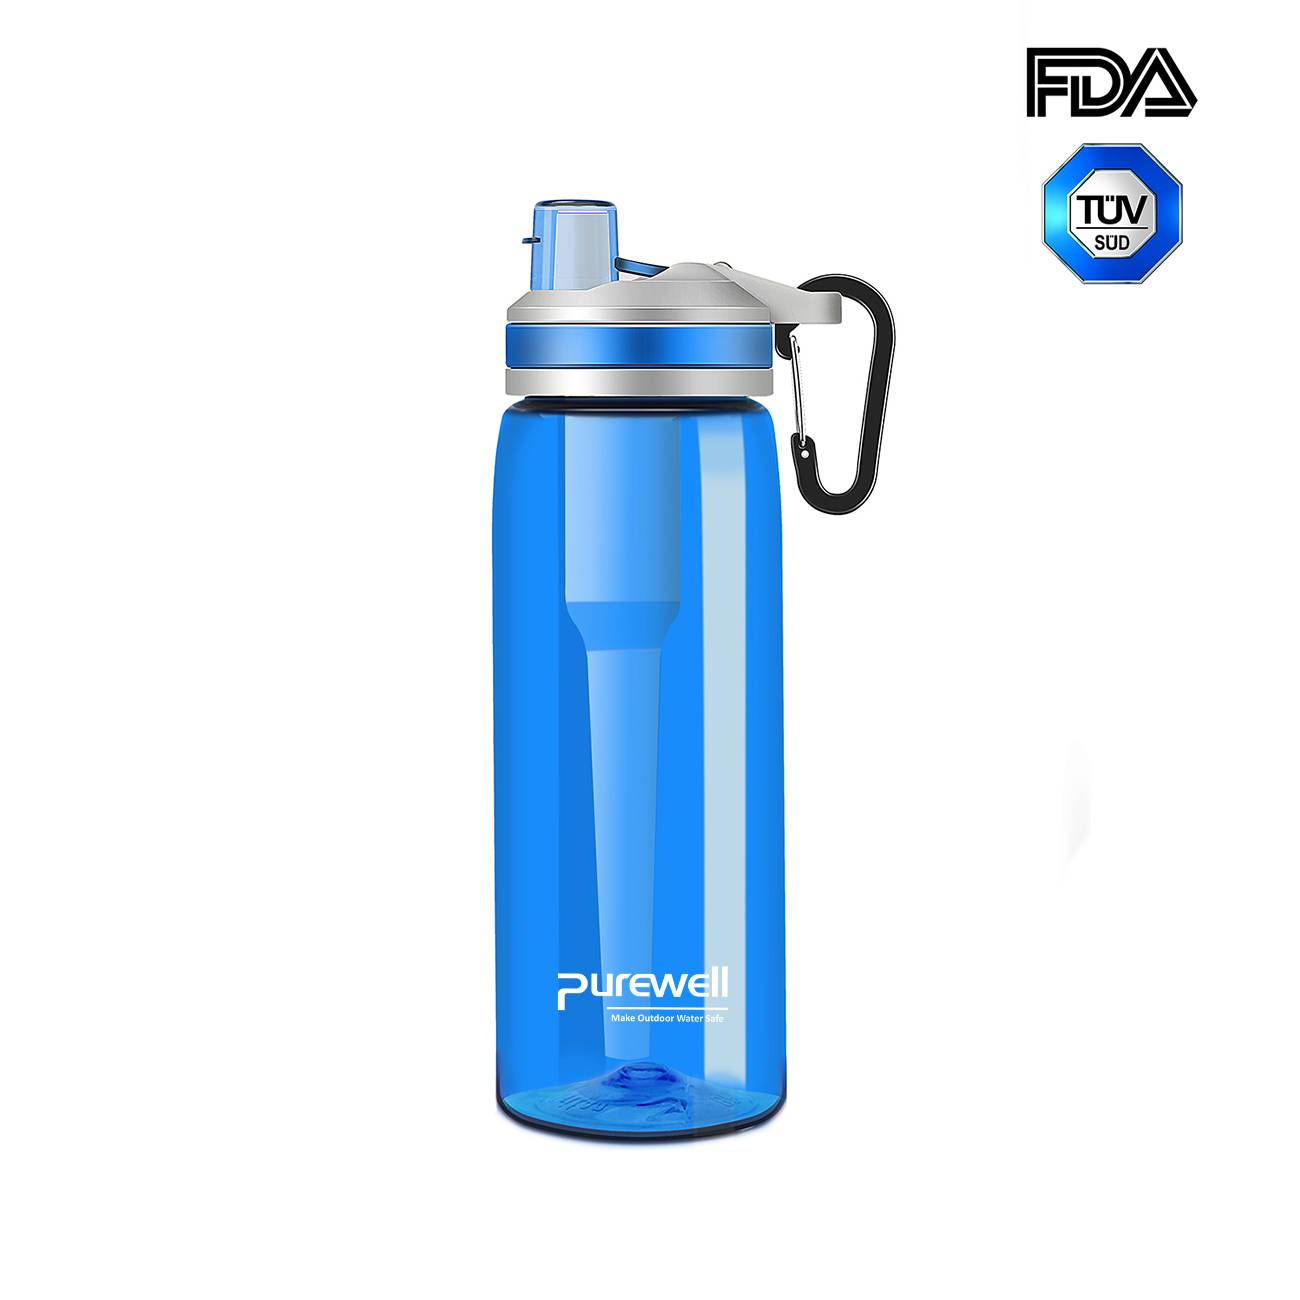 Water Filter Bottle with Activated Carbon Remove Chlorine, Bad Odor K8628